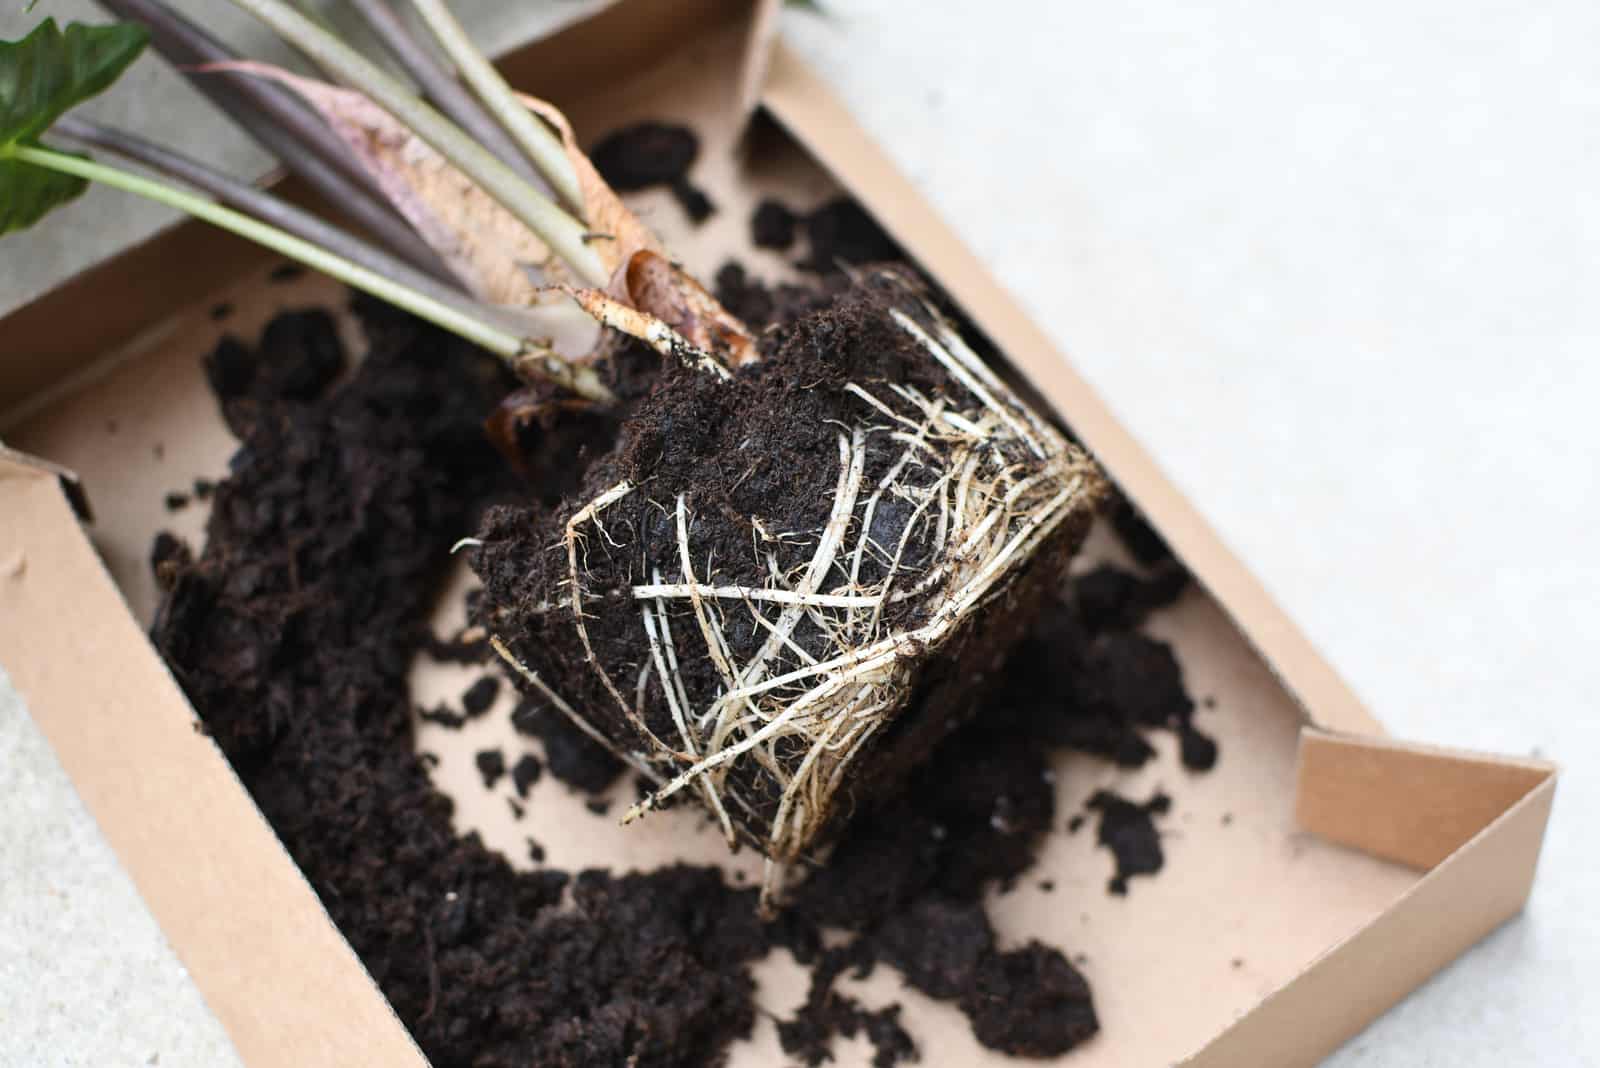 Repotting root bound house plant 